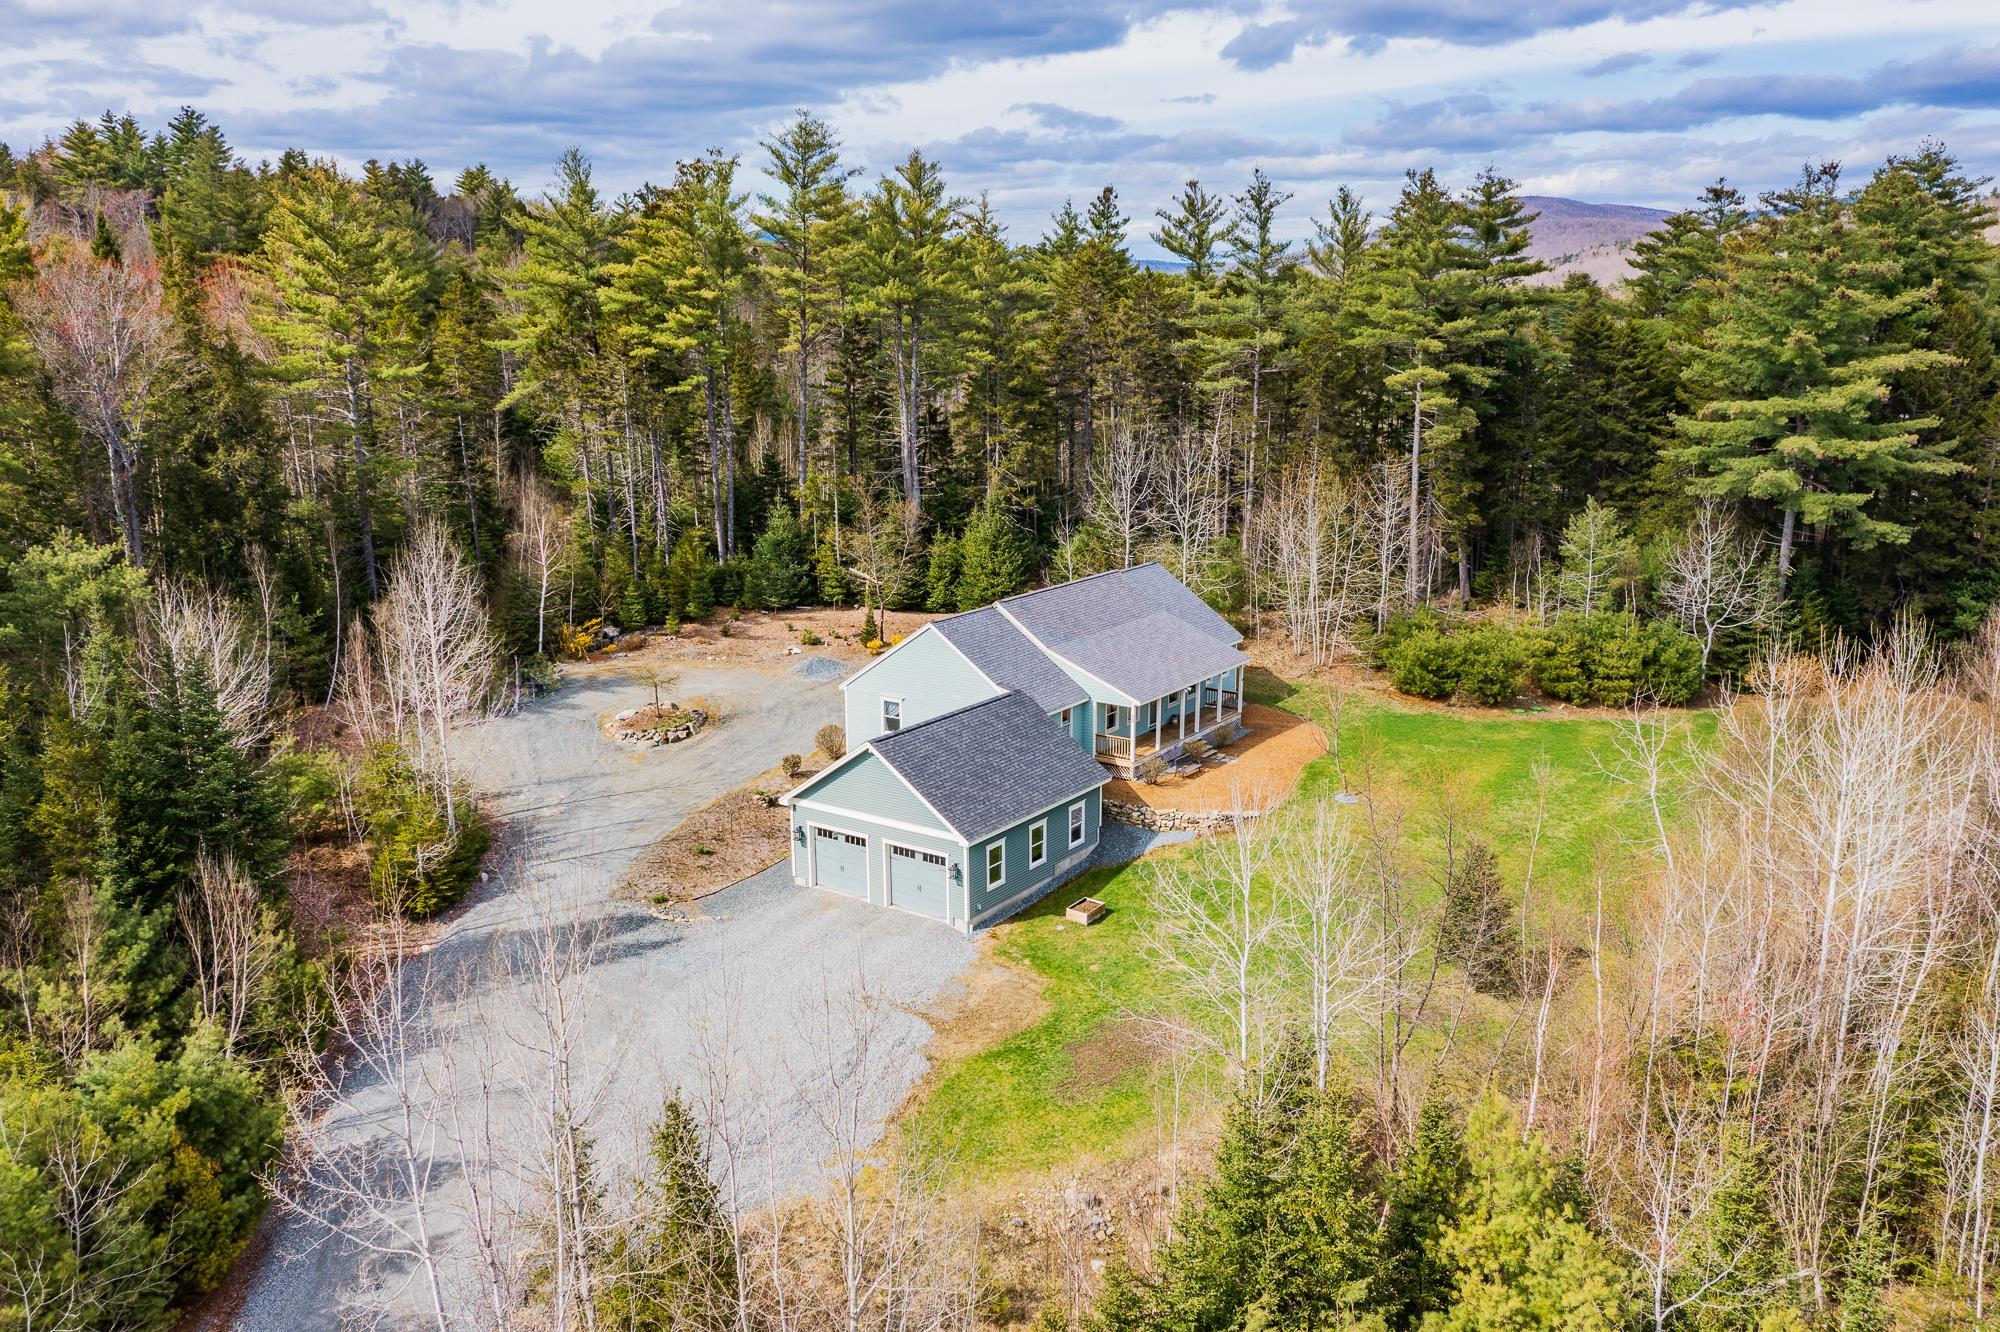 CANAAN NH Homes for sale